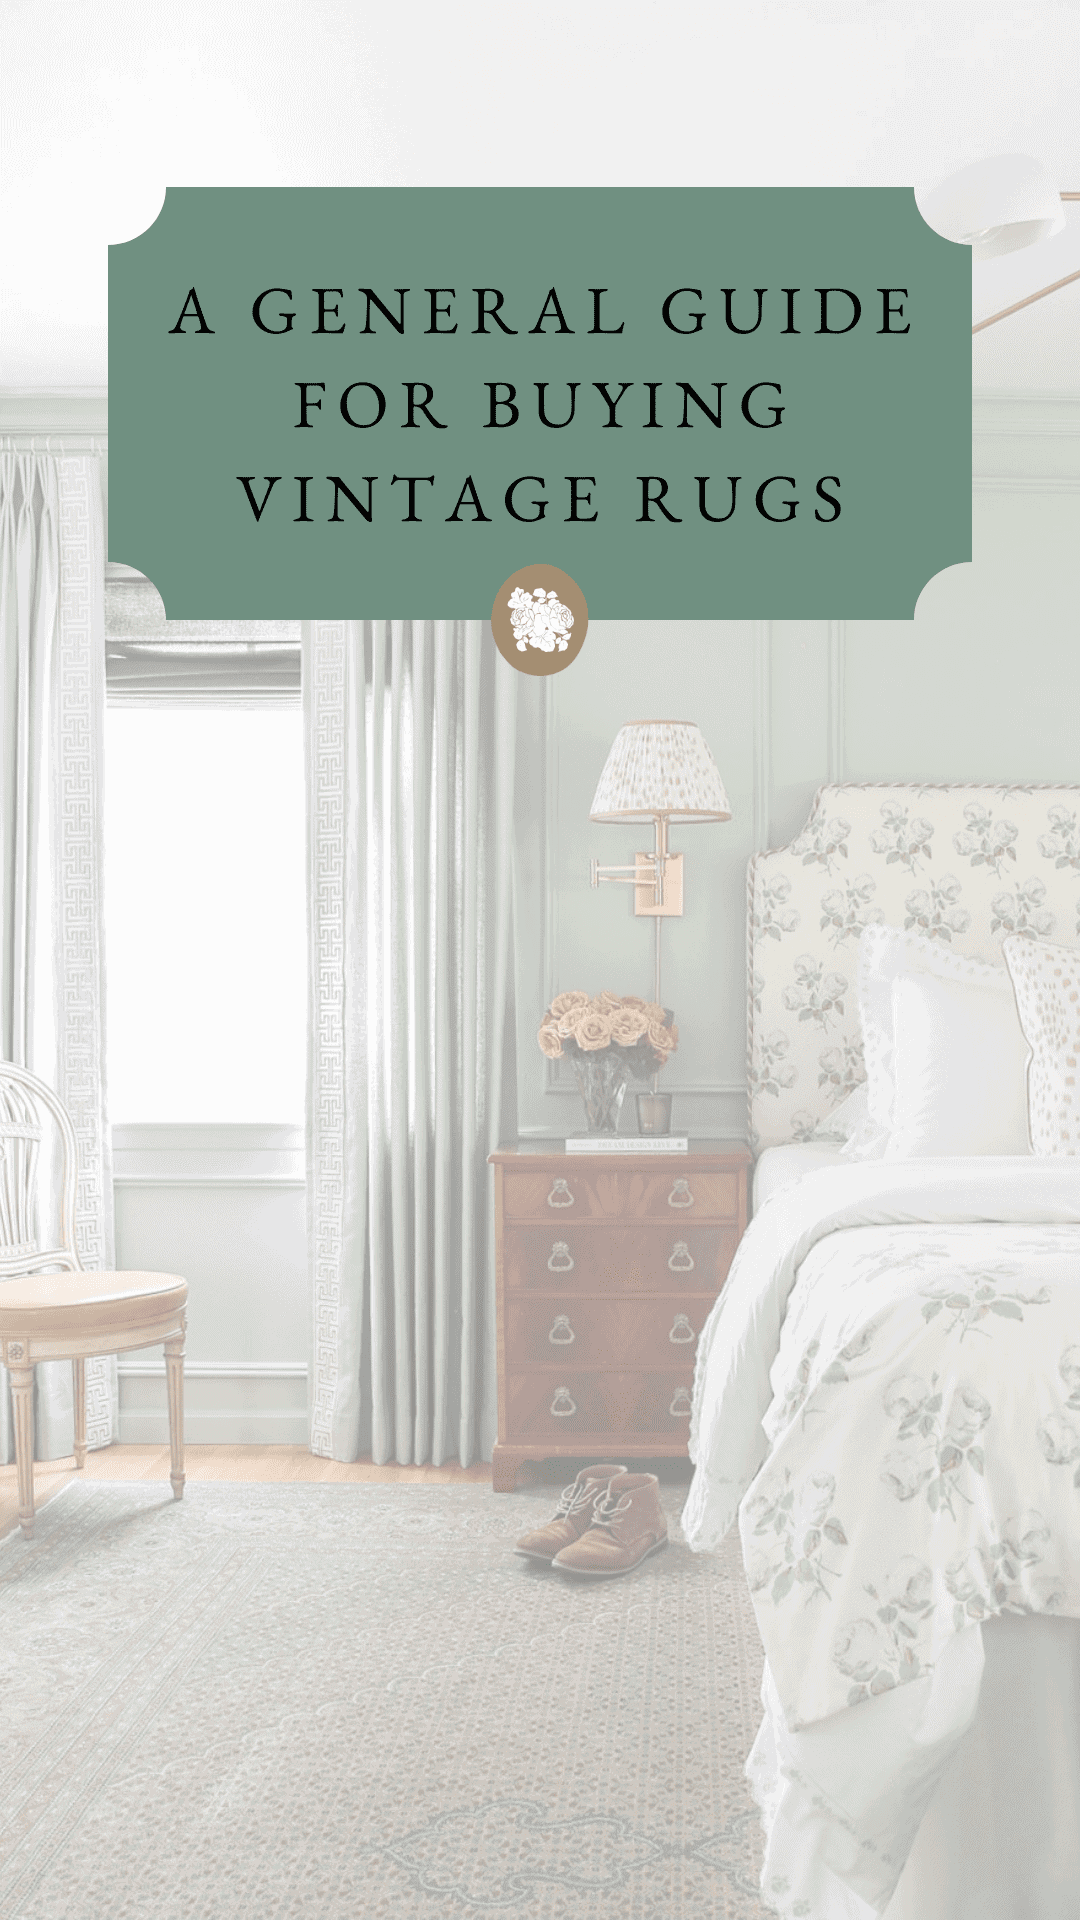 A-GENERAL-GUIDE-FOR-BUYING-VINTAGE-RUGS